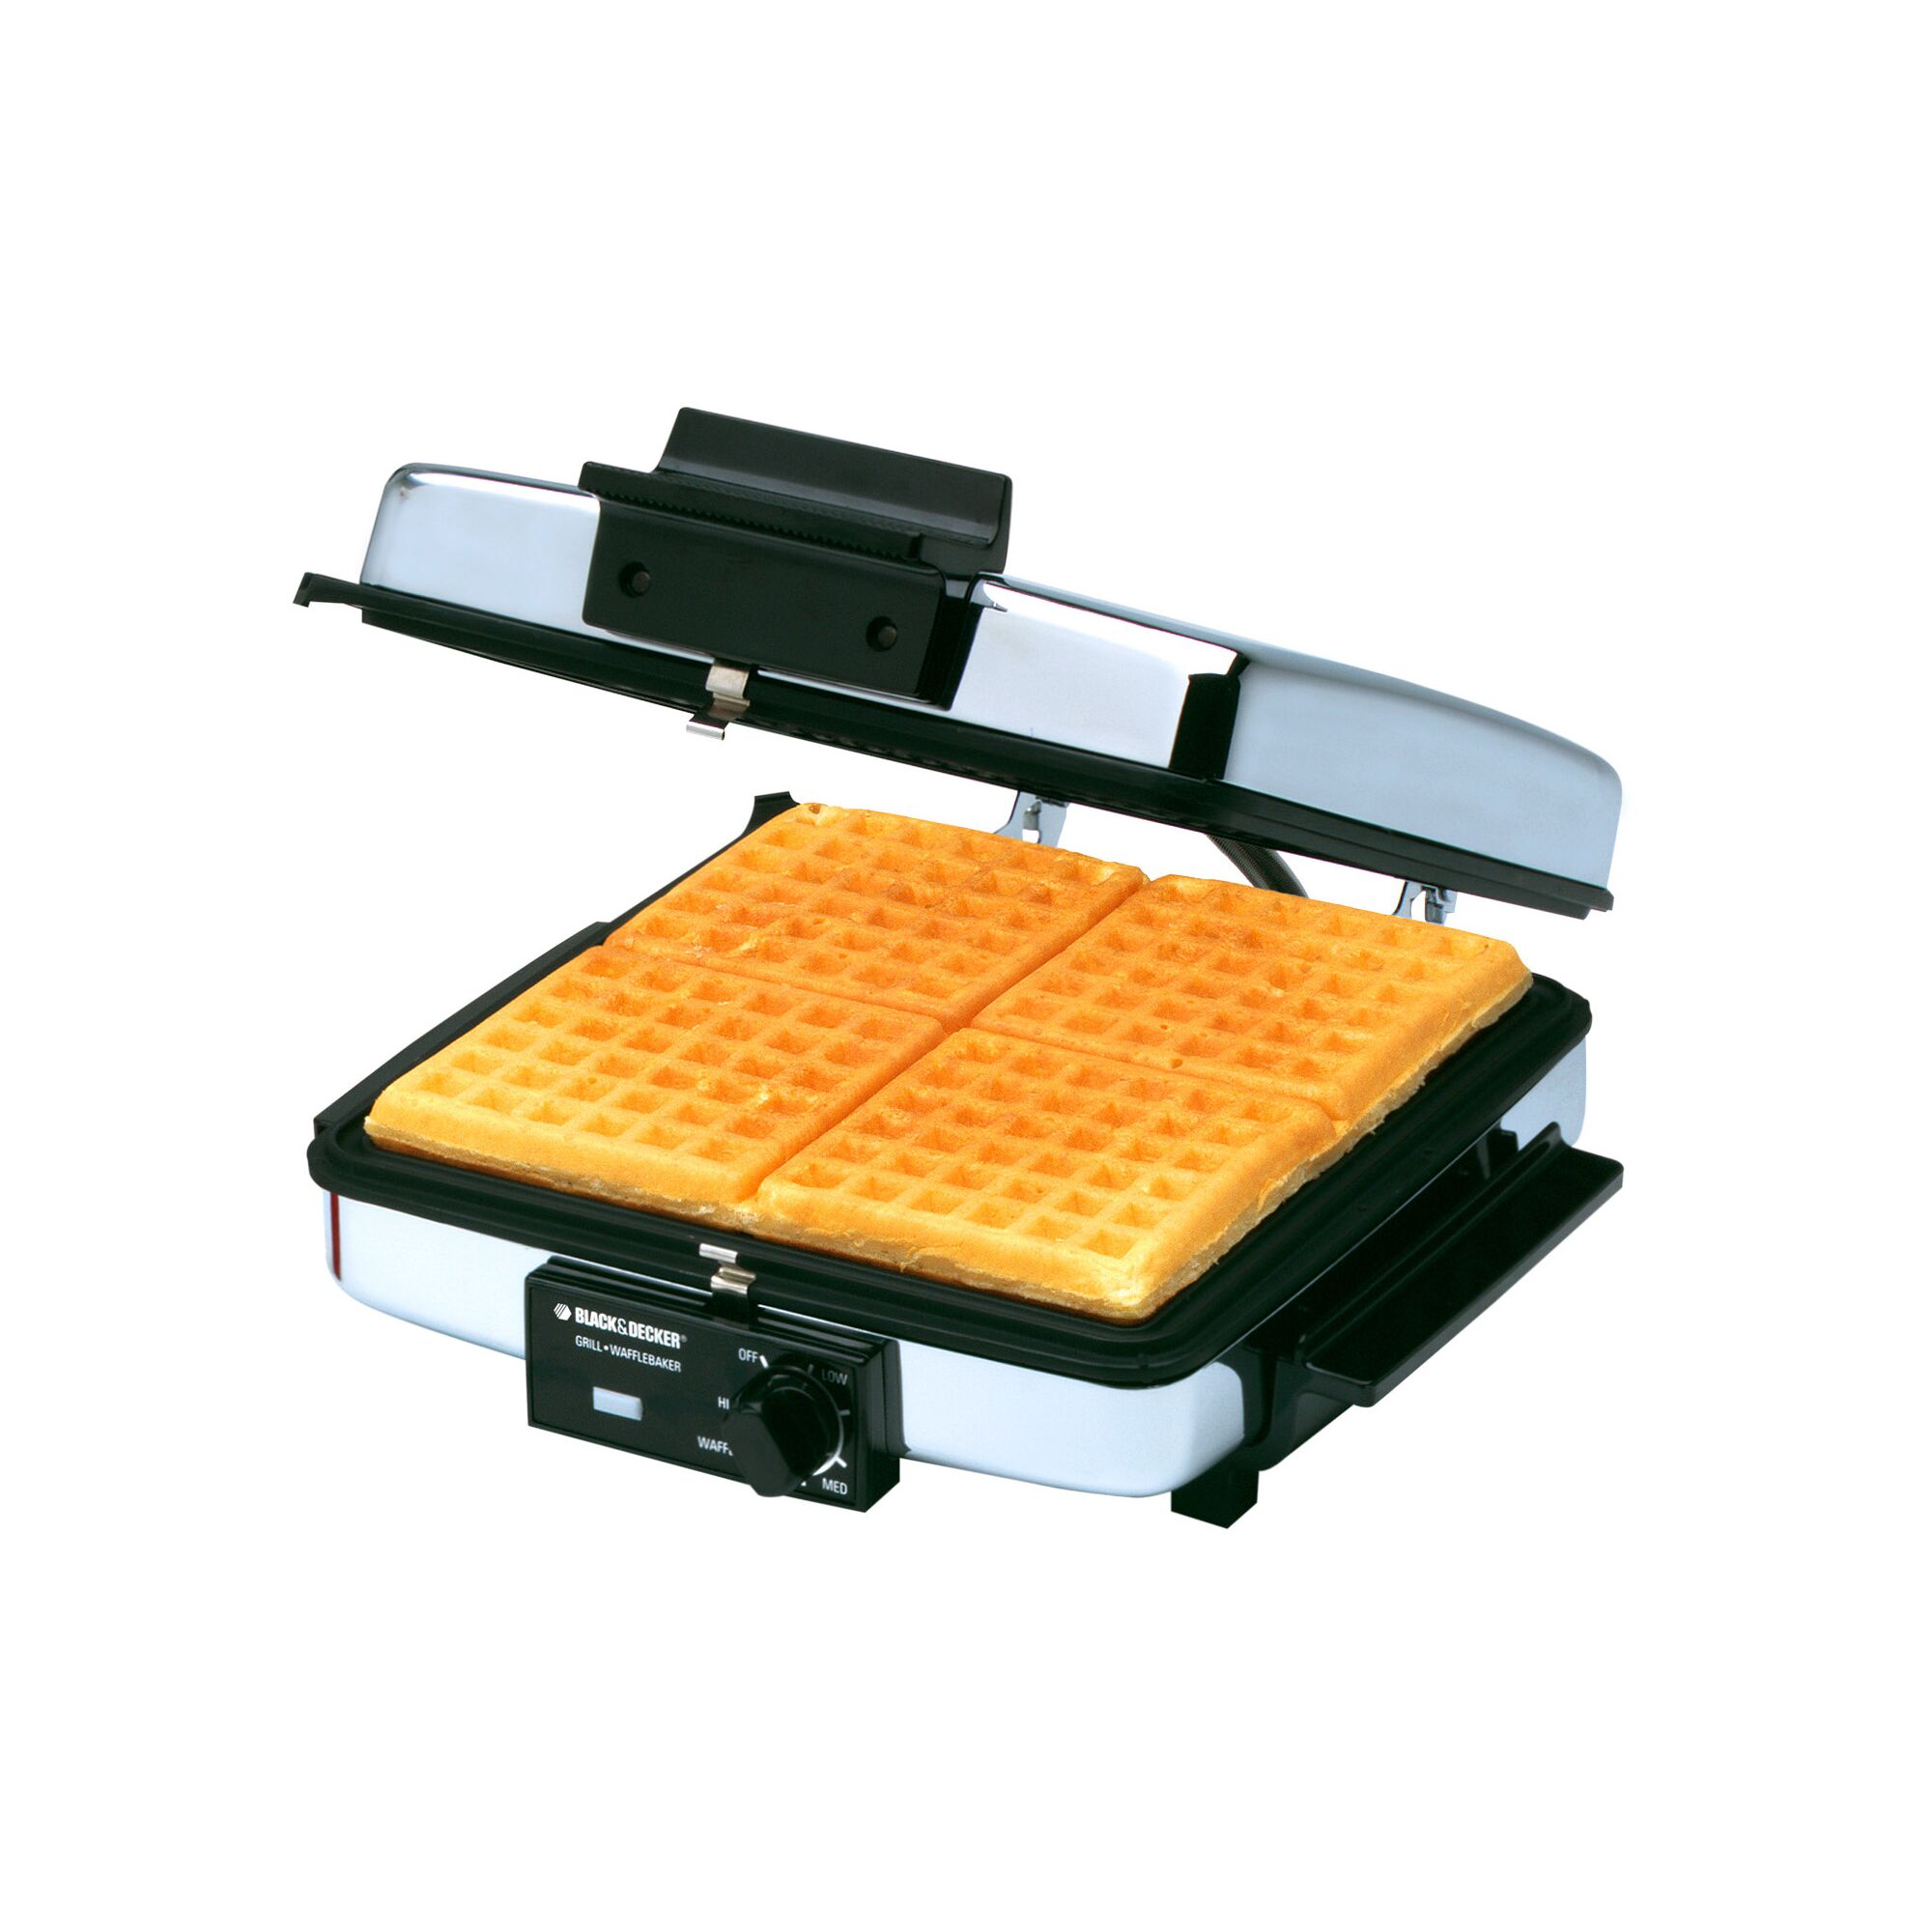 Profile of a 3 in 1 grill griddle and waffle maker.